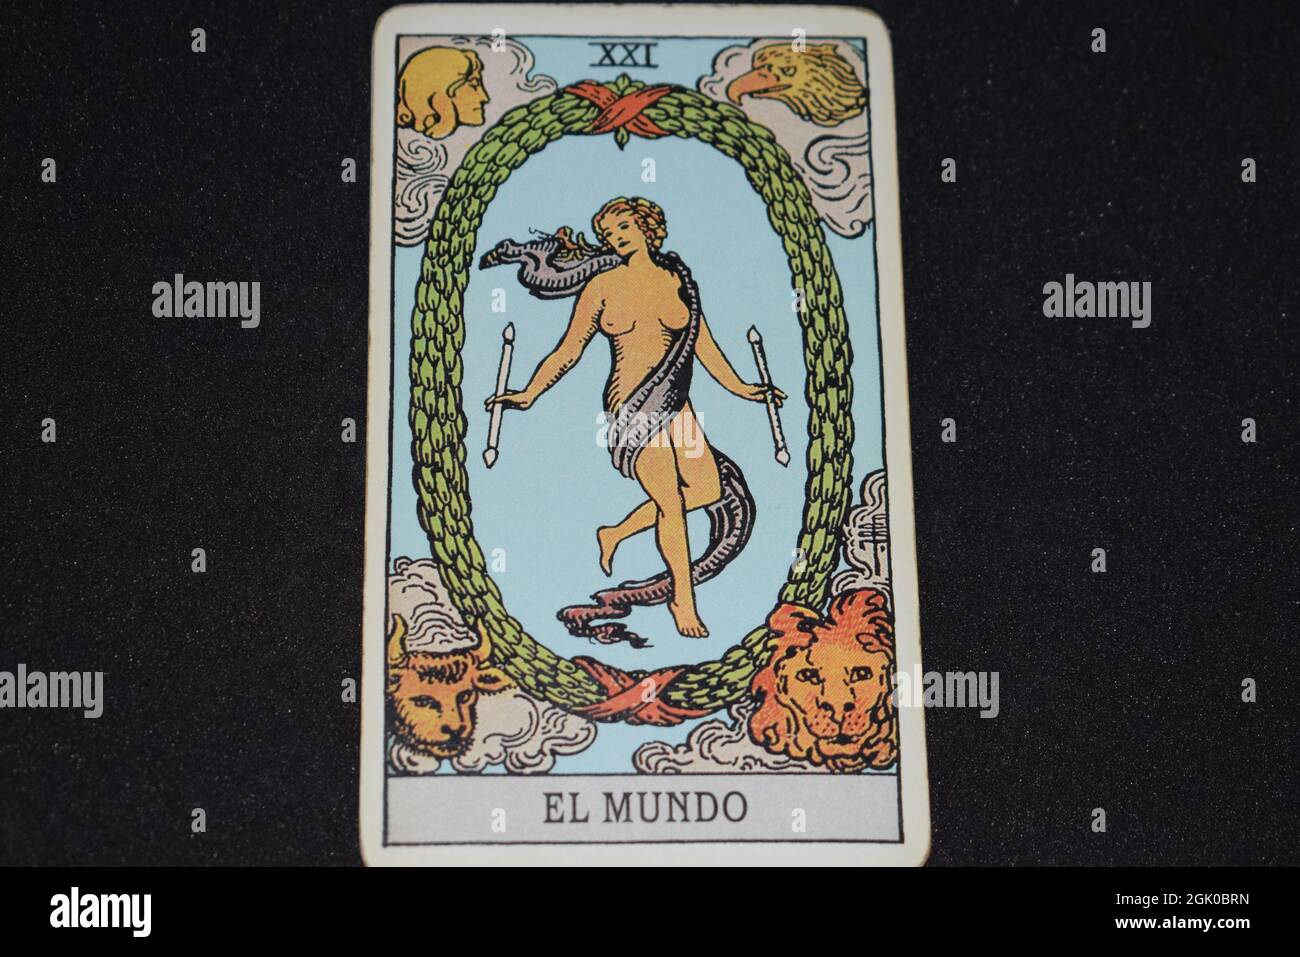 The tarot card number 21 represents THE WORLD in the tarot cards of the major arcana on a black background. Stock Photo